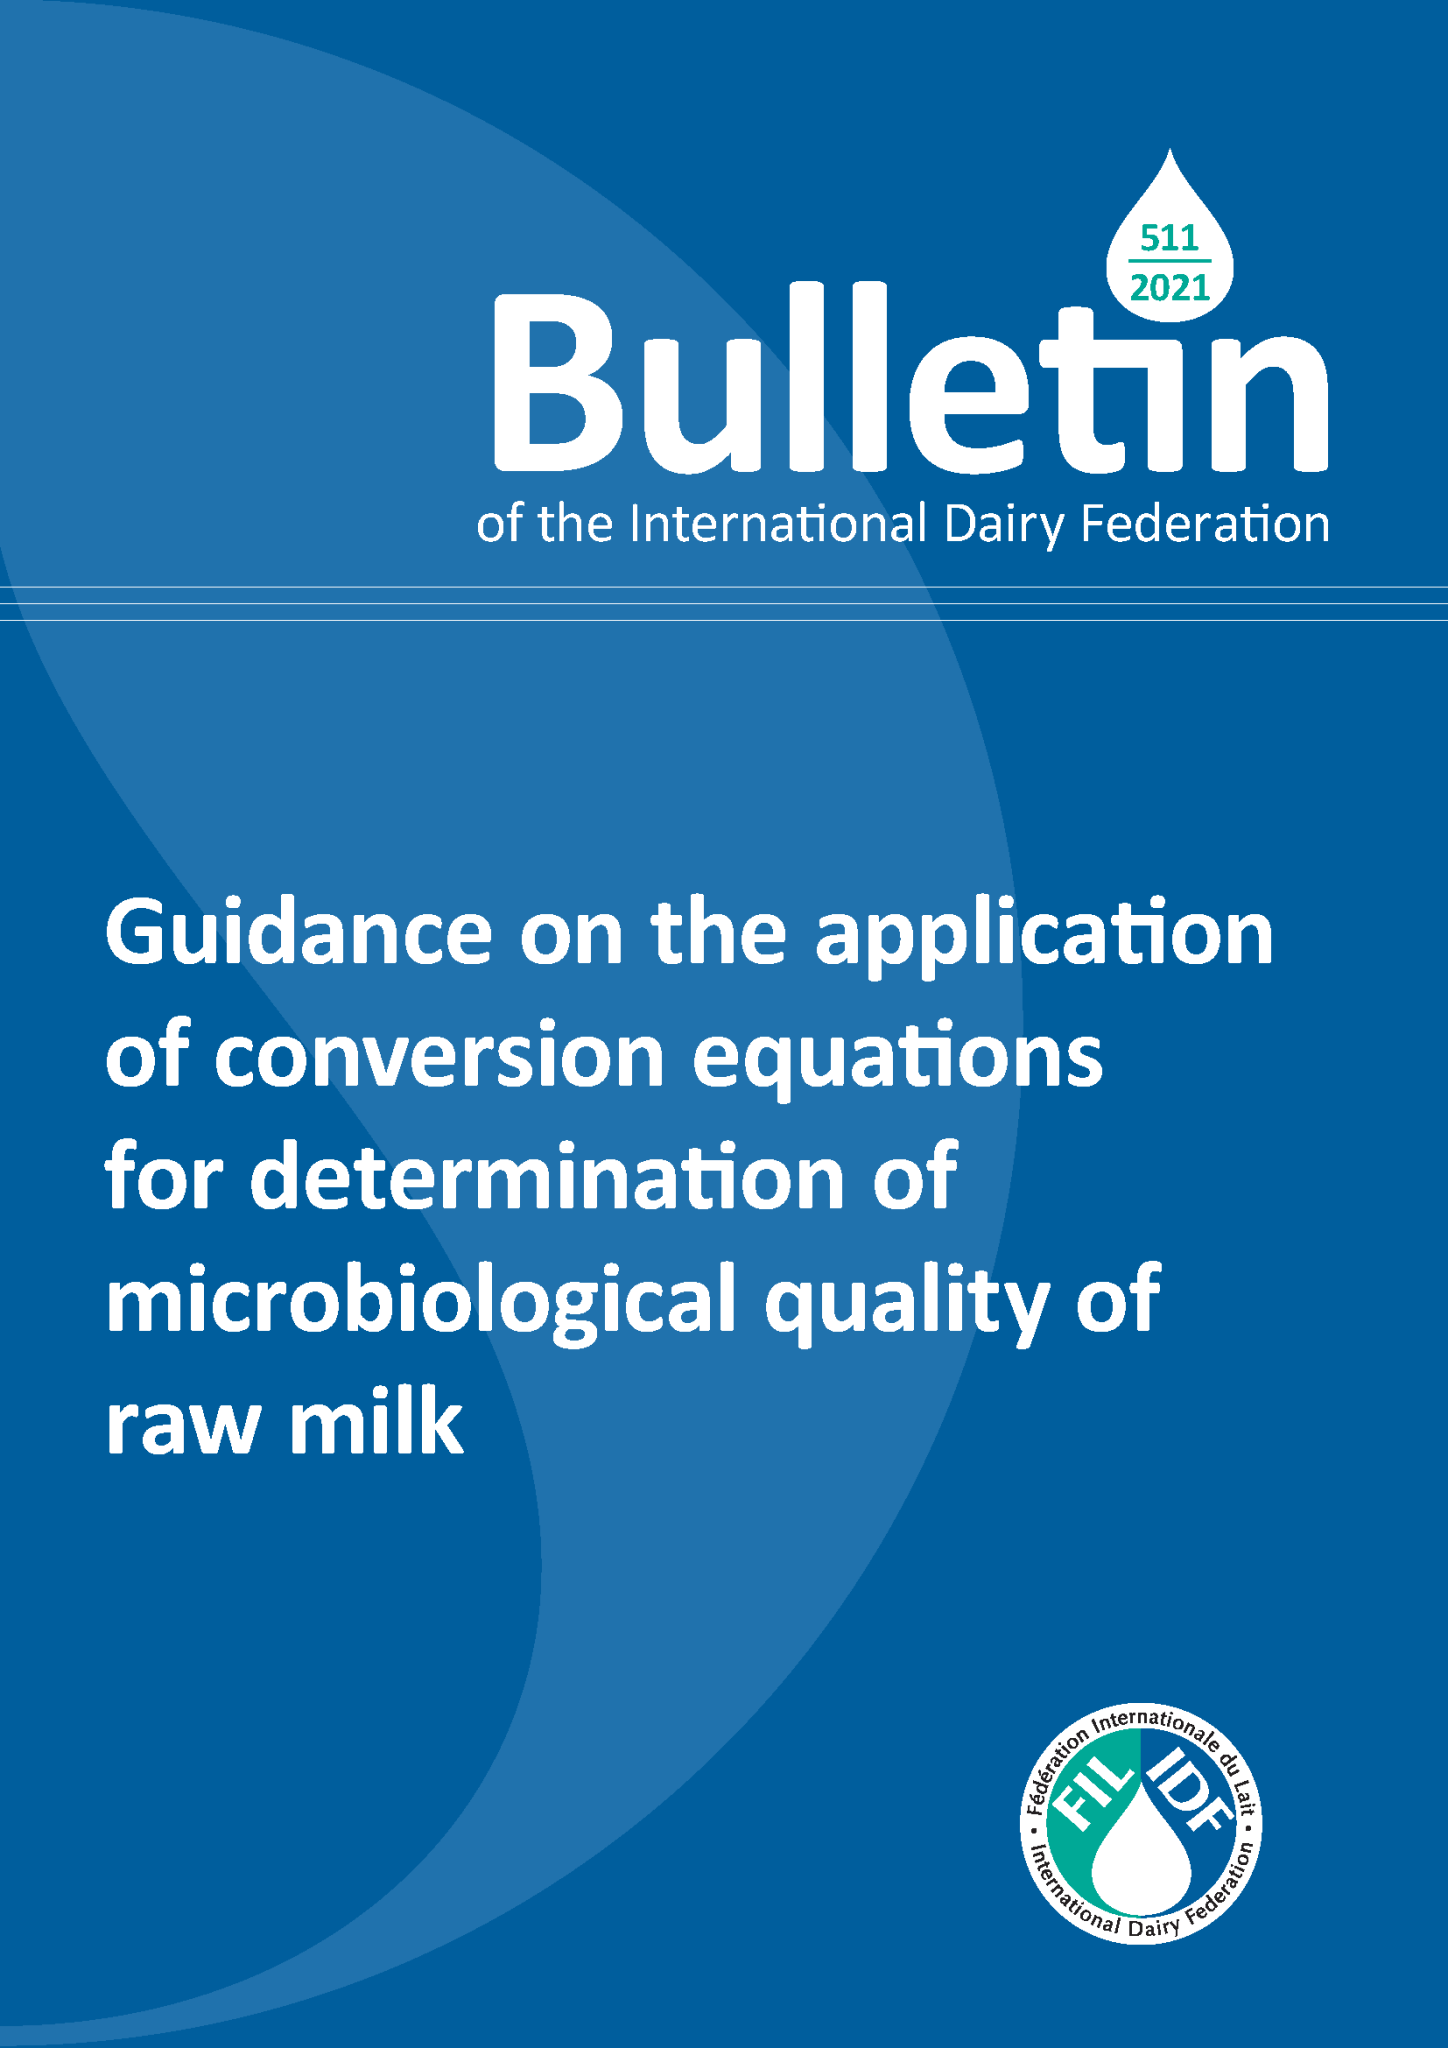 Bulletin of the IDF N° 511/2021: Guidance on the application of conversion equations for determination of microbiological quality of raw milk - FIL-IDF